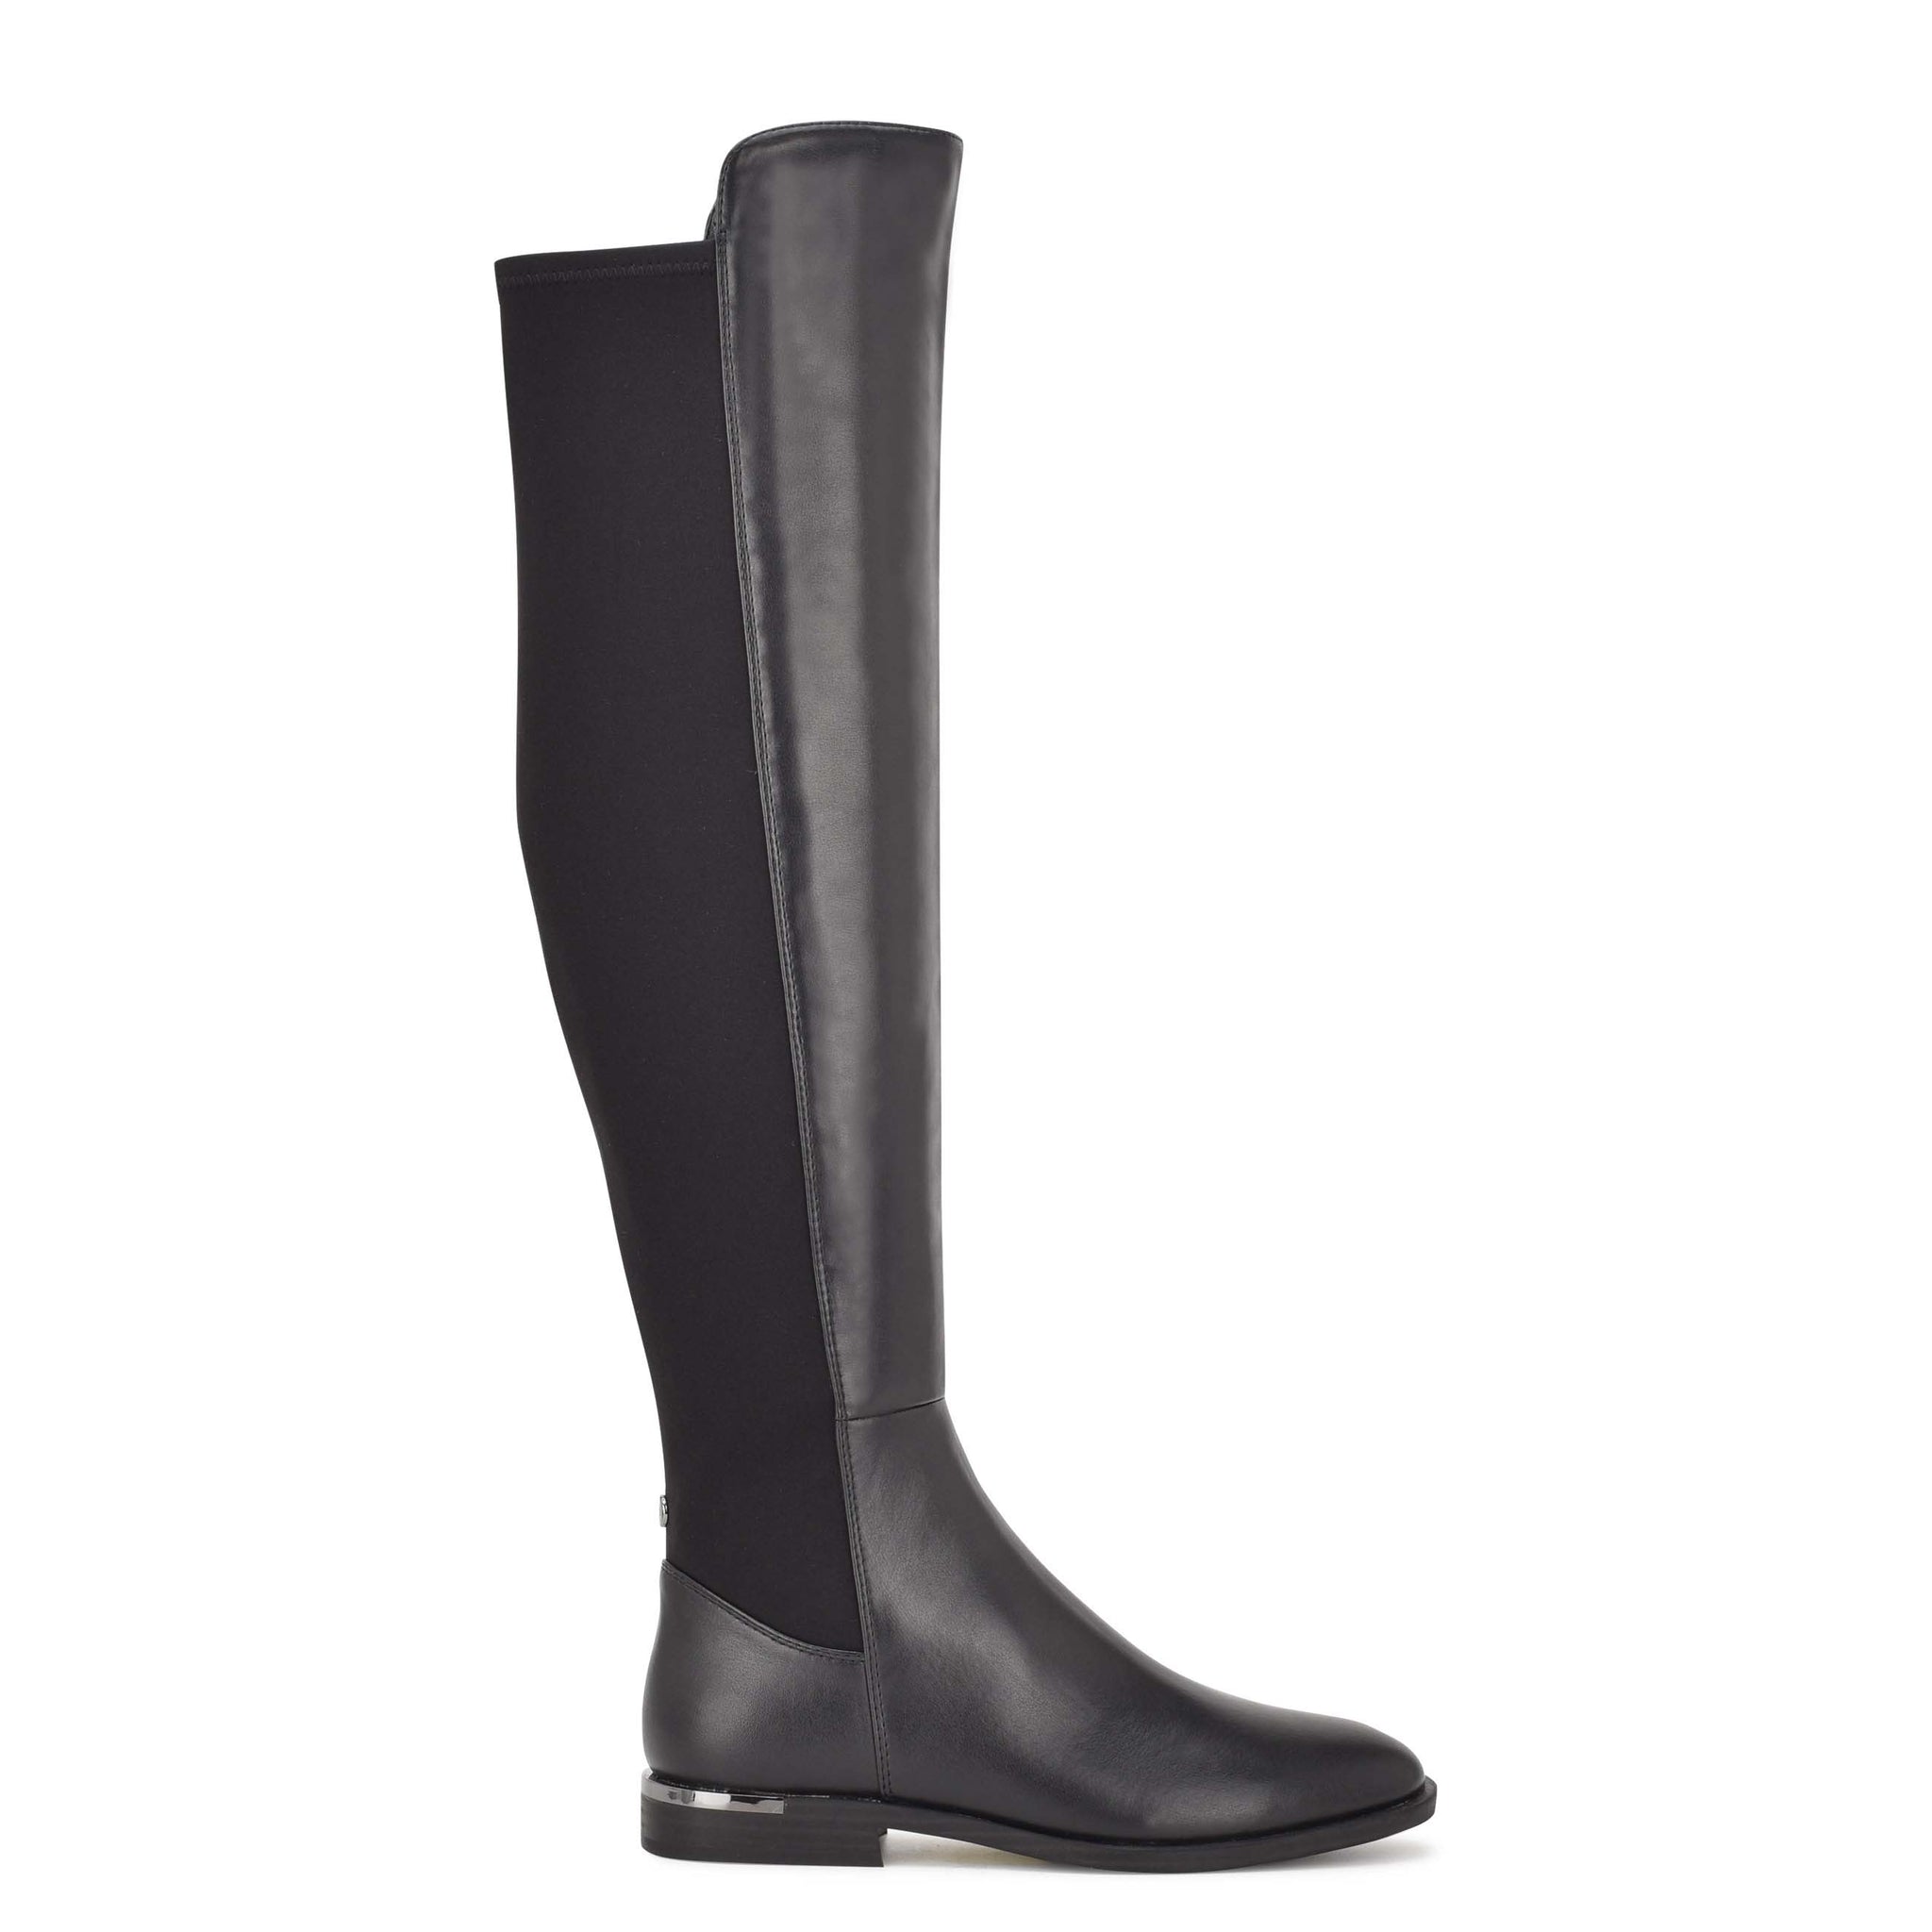 Allair Stretch Back Over the Knee Boots - Nine West